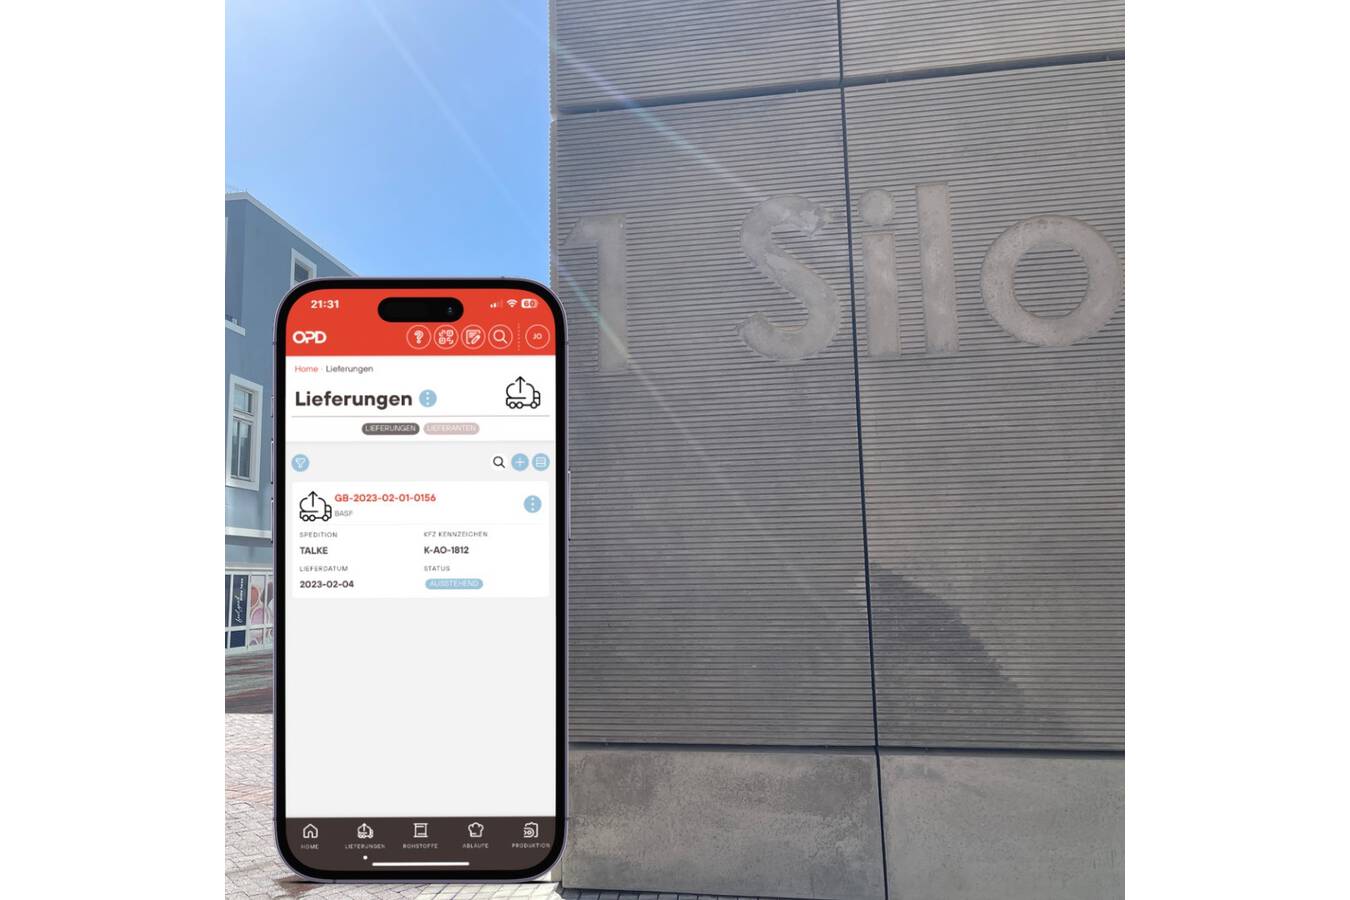 OPDENHOFF - The New „Art“ of Silomanagement  Say goodbye to complicated, confusing silo management systems. OPDPRO.CARE brings transparency, efficiency and flexibility to your processes. Discover the future of silo management today with OPDPRO.CARE #future #art